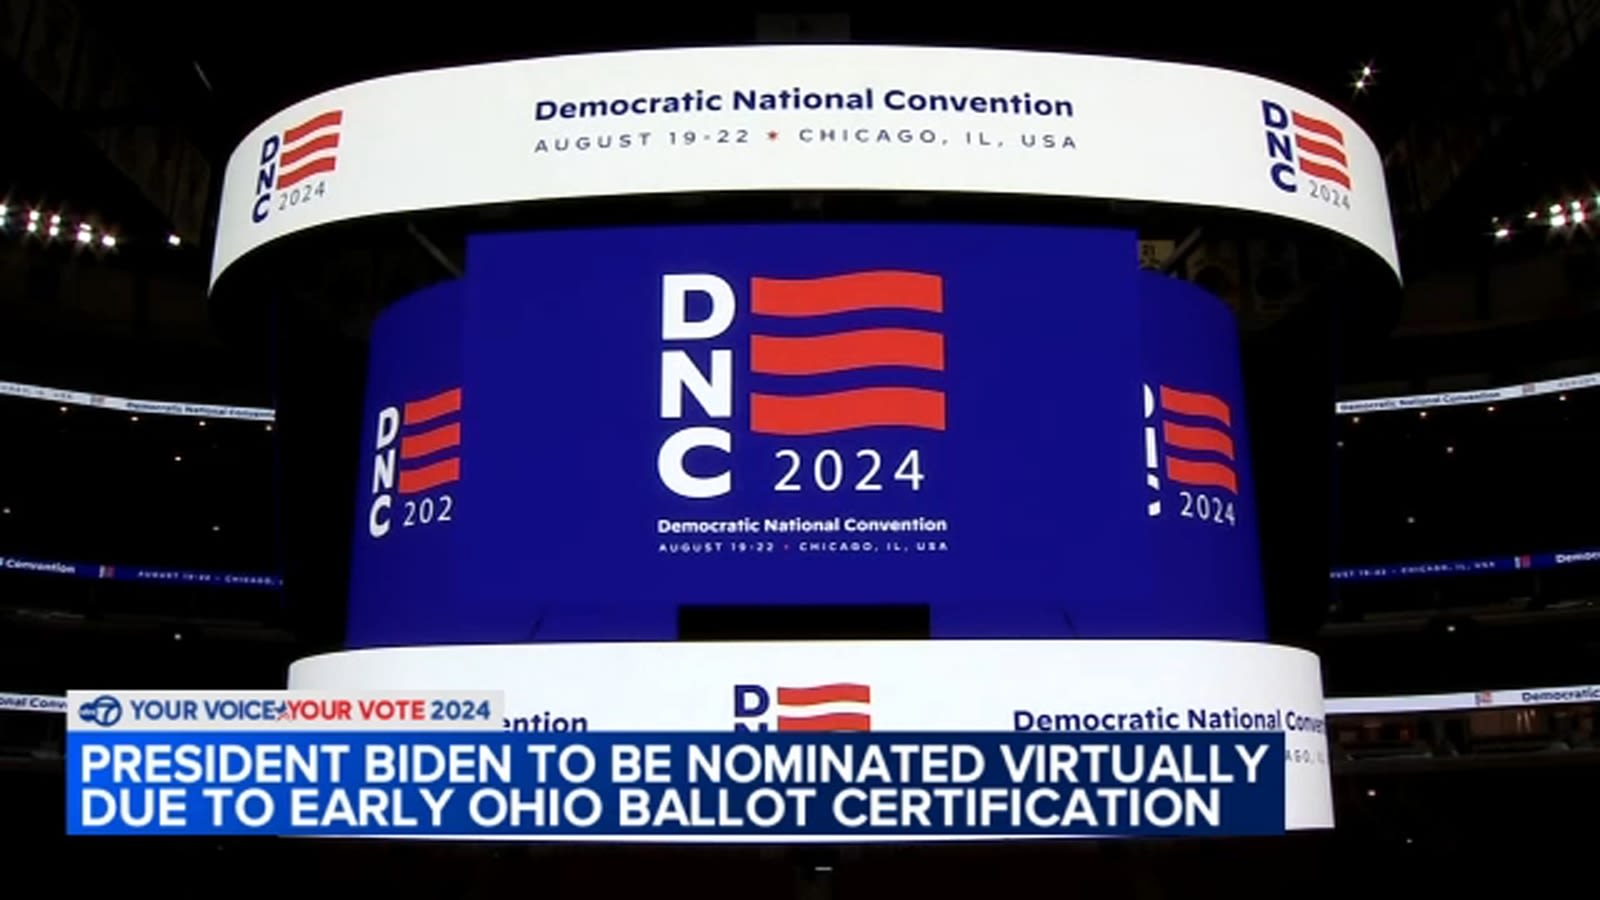 DNC plans to hold virtual roll call to nominate President Biden before Chicago convention